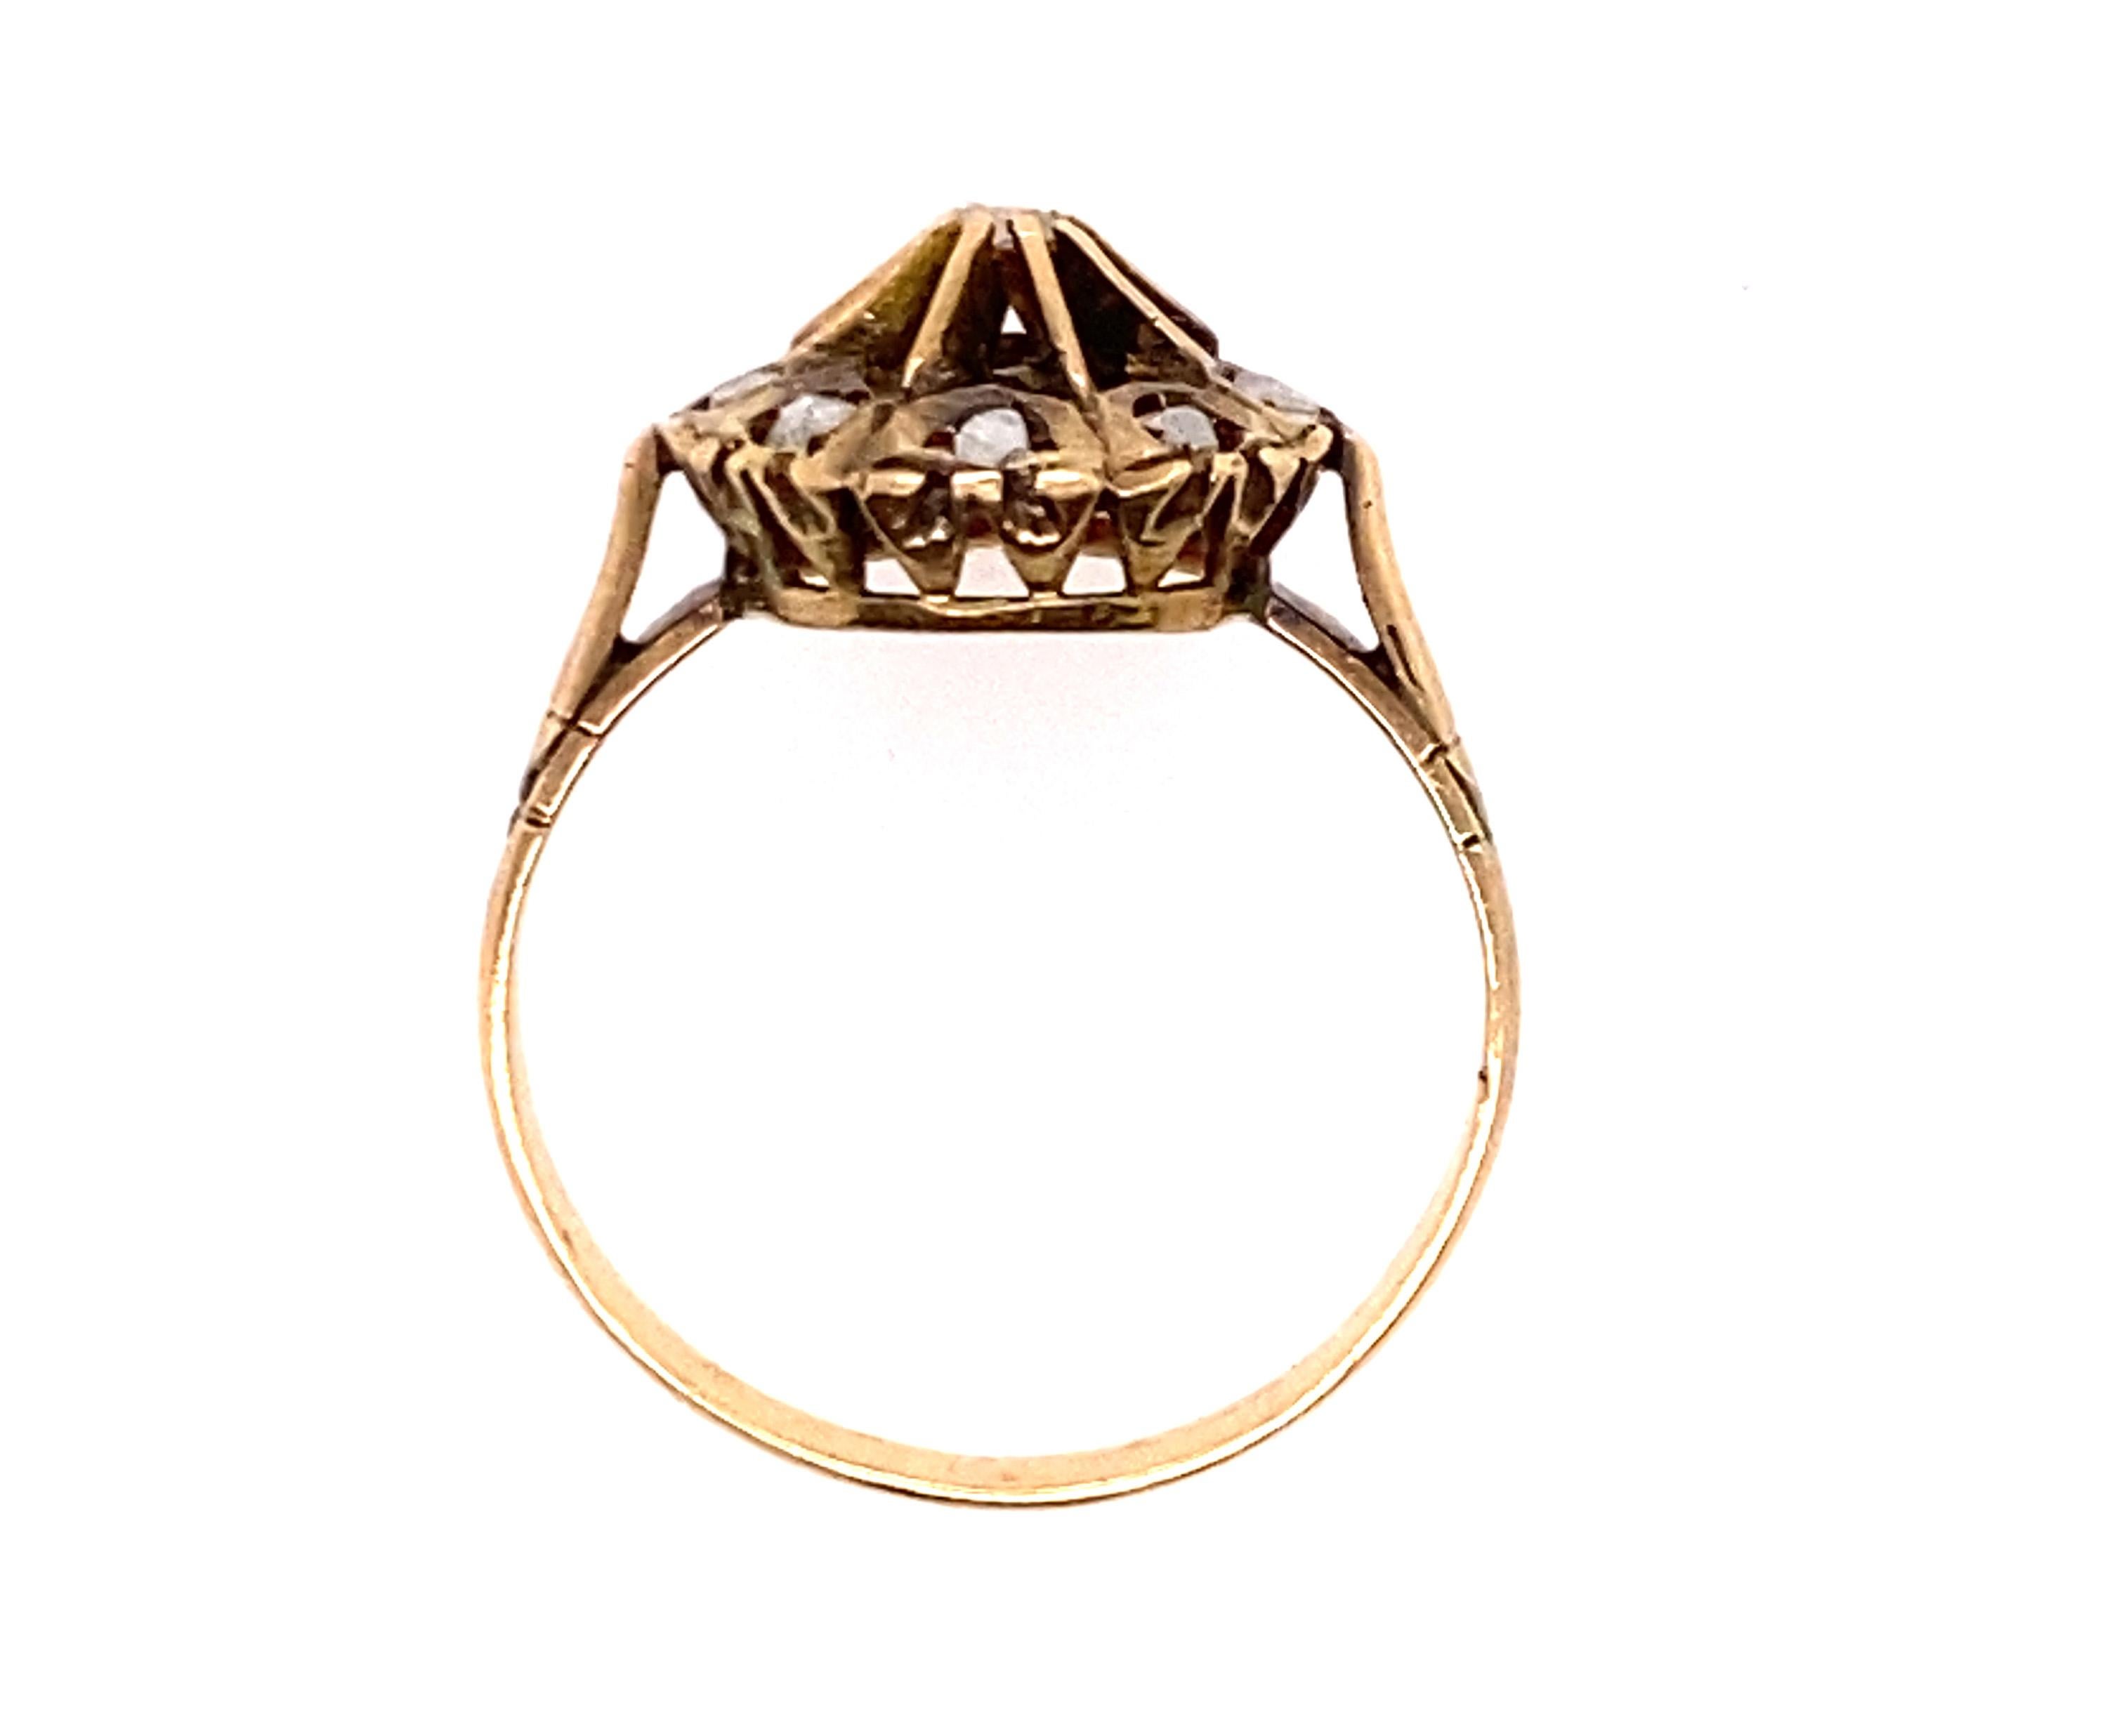 Genuine Original 1800's-1830's Georgian Antique Diamond Ring .40ct Rose Cut 14K Yellow Gold

 

Genuine Rose Cut Natural Mined Diamonds

Genuine Antique Ring was Hand Made Almost 200 Years Ago

Stunning Hand Carved Details

Gorgeous Patina Proves